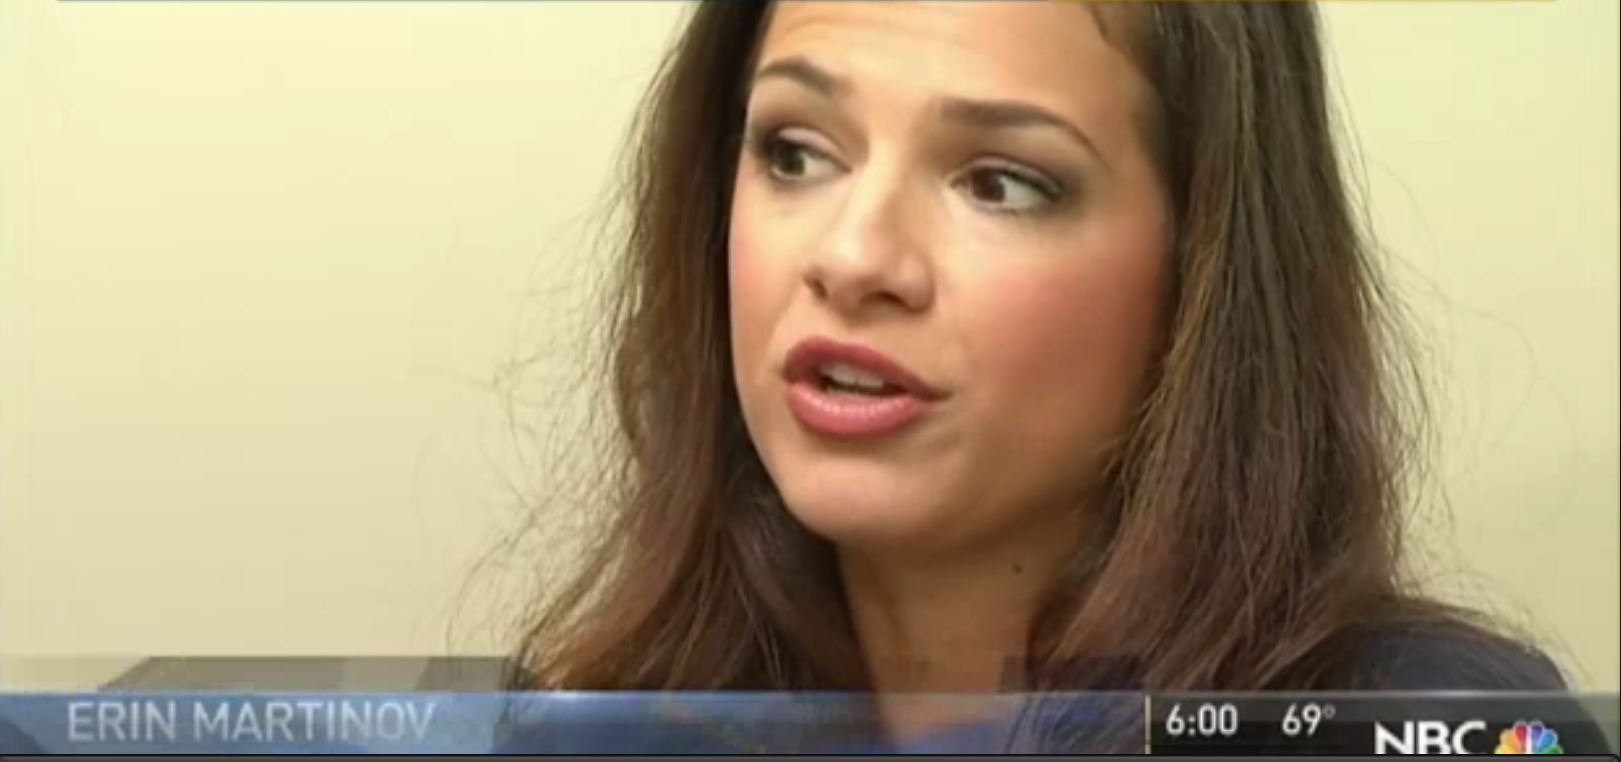 Horowitz client erin martinov speaks to nbc news about assault against her by chiropractor Horowitz helped Erin Martinov bring her case against the chiropractor